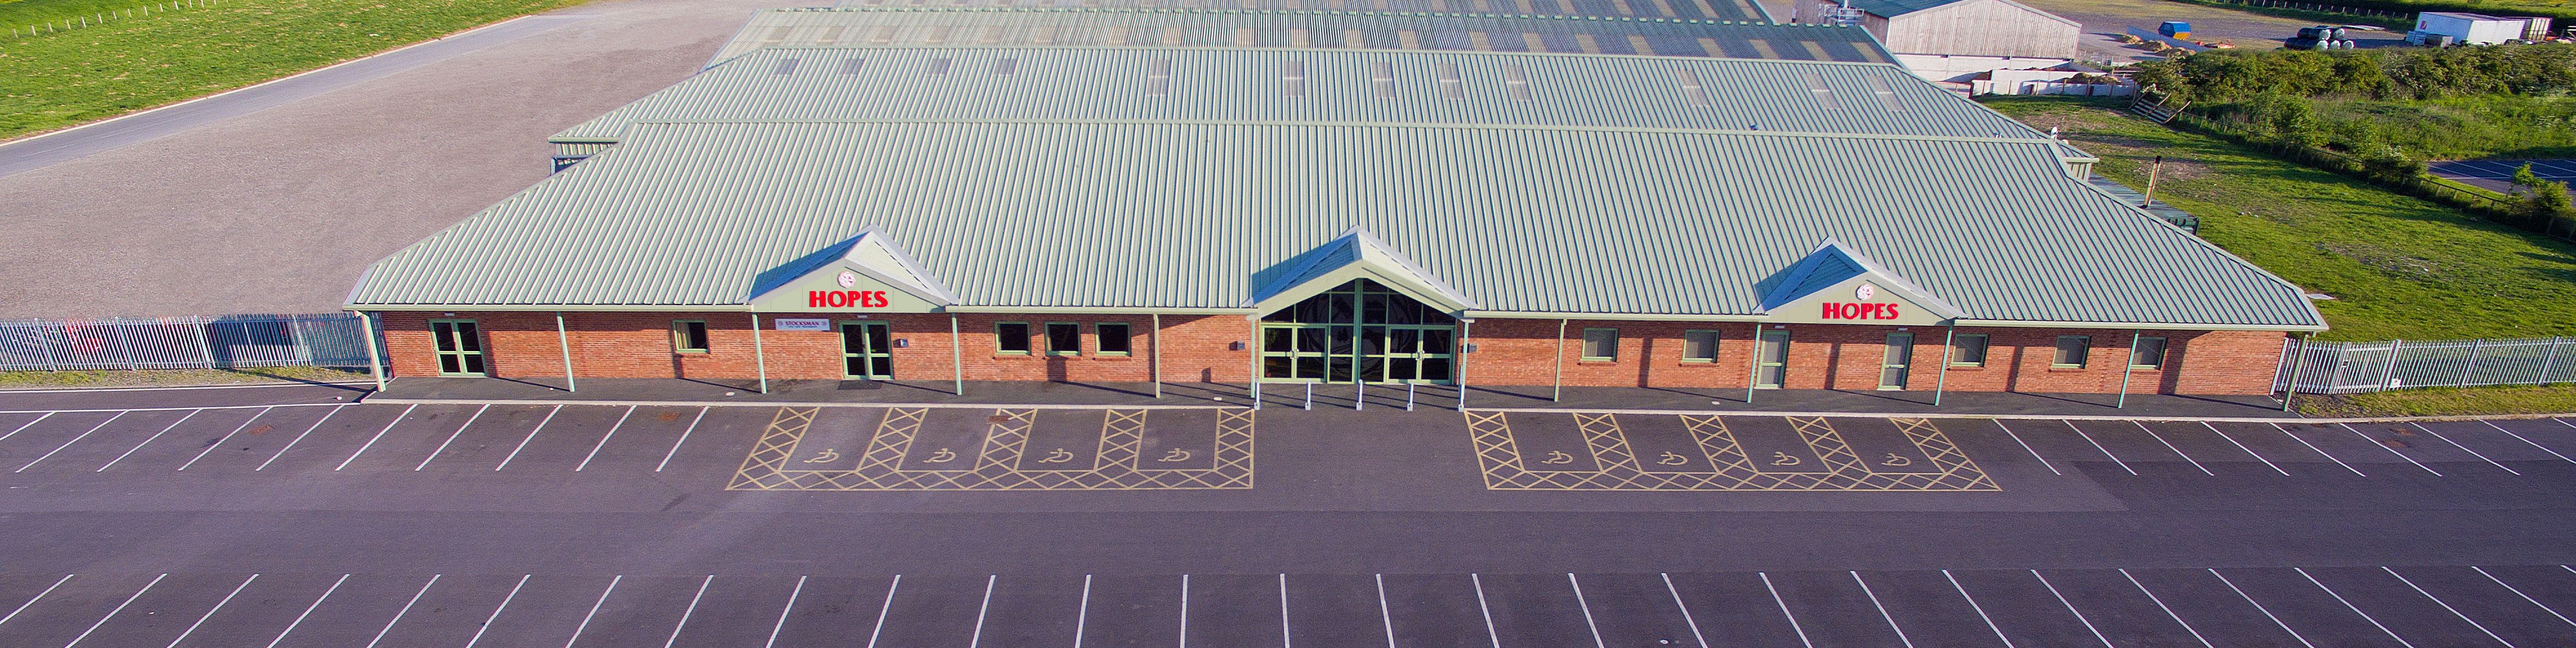 Aerial view of Hopes Auction building